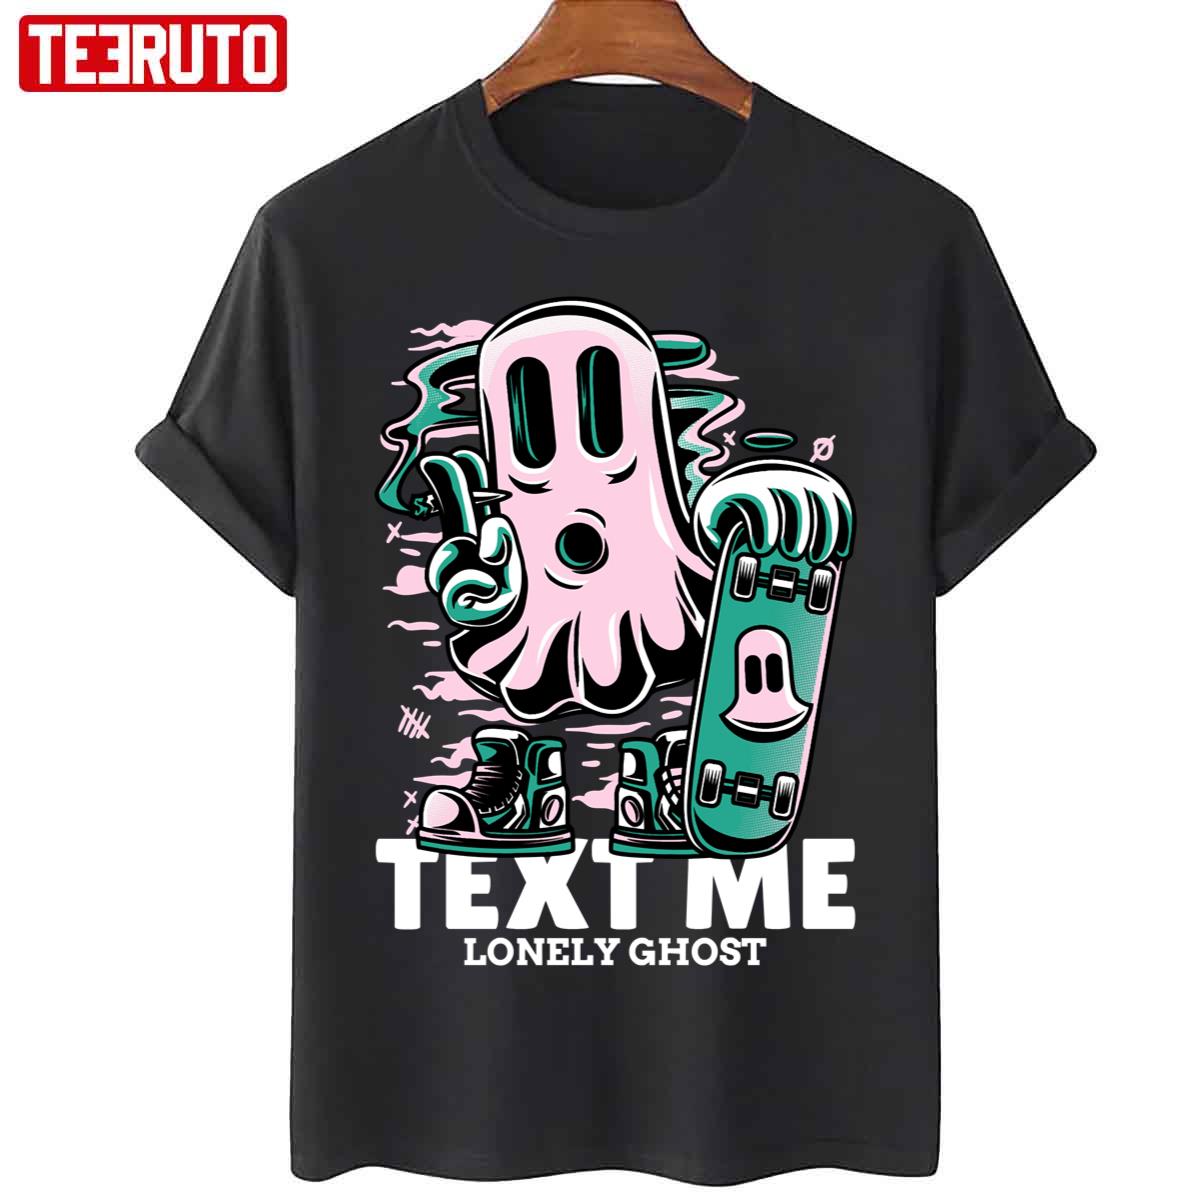 Art Text Me Lonely Ghost Unisex T-Shirt